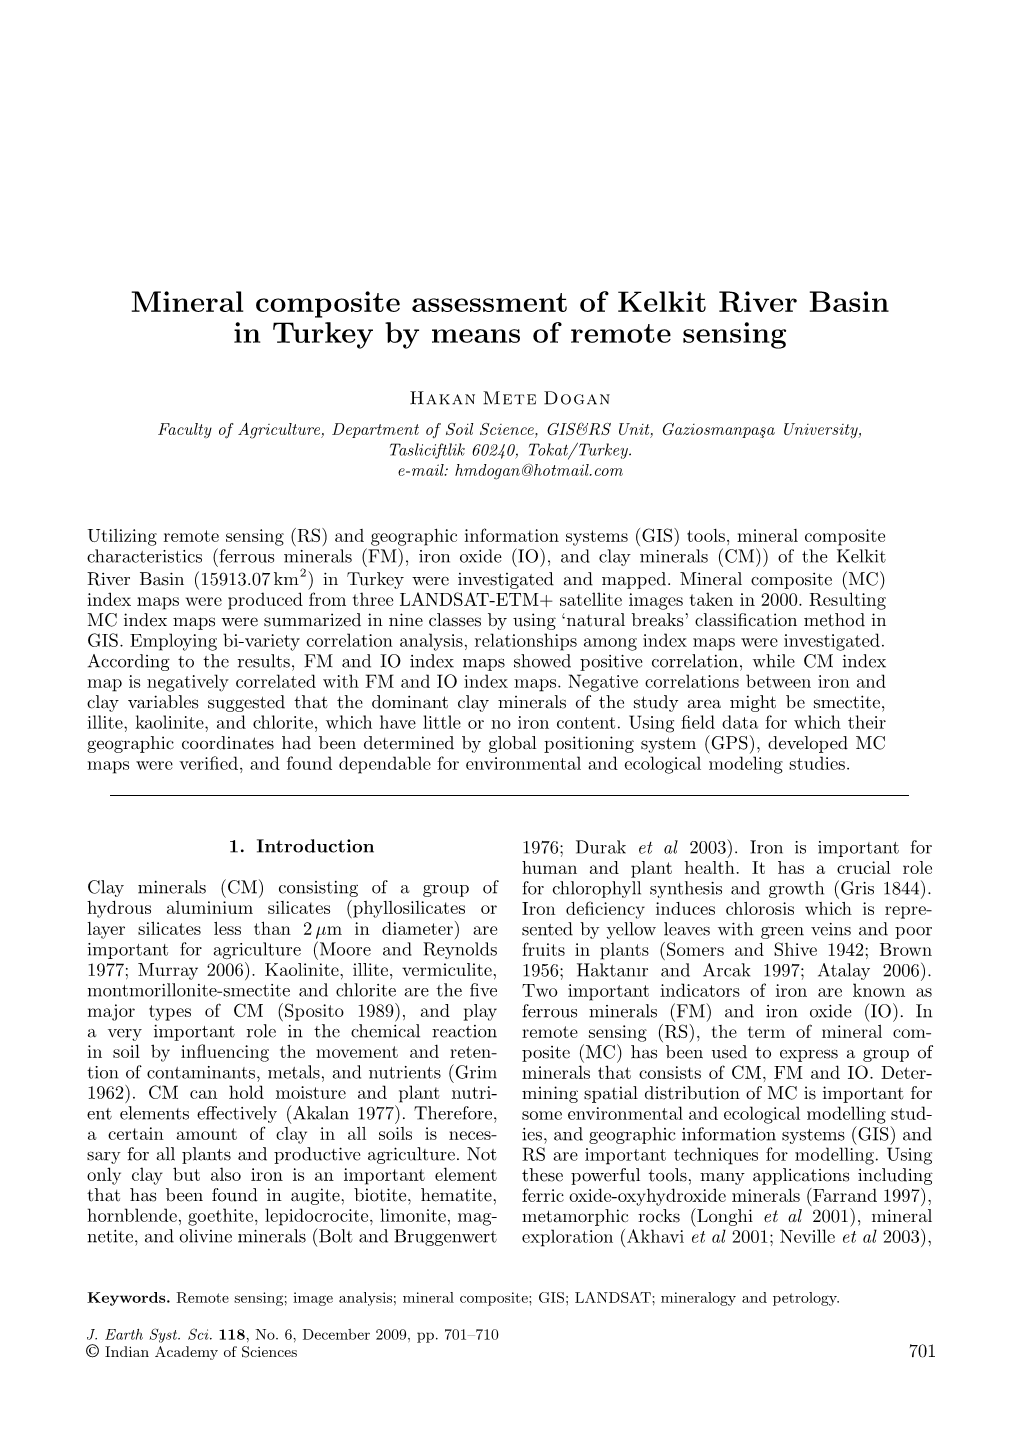 Mineral Composite Assessment of Kelkit River Basin in Turkey by Means of Remote Sensing